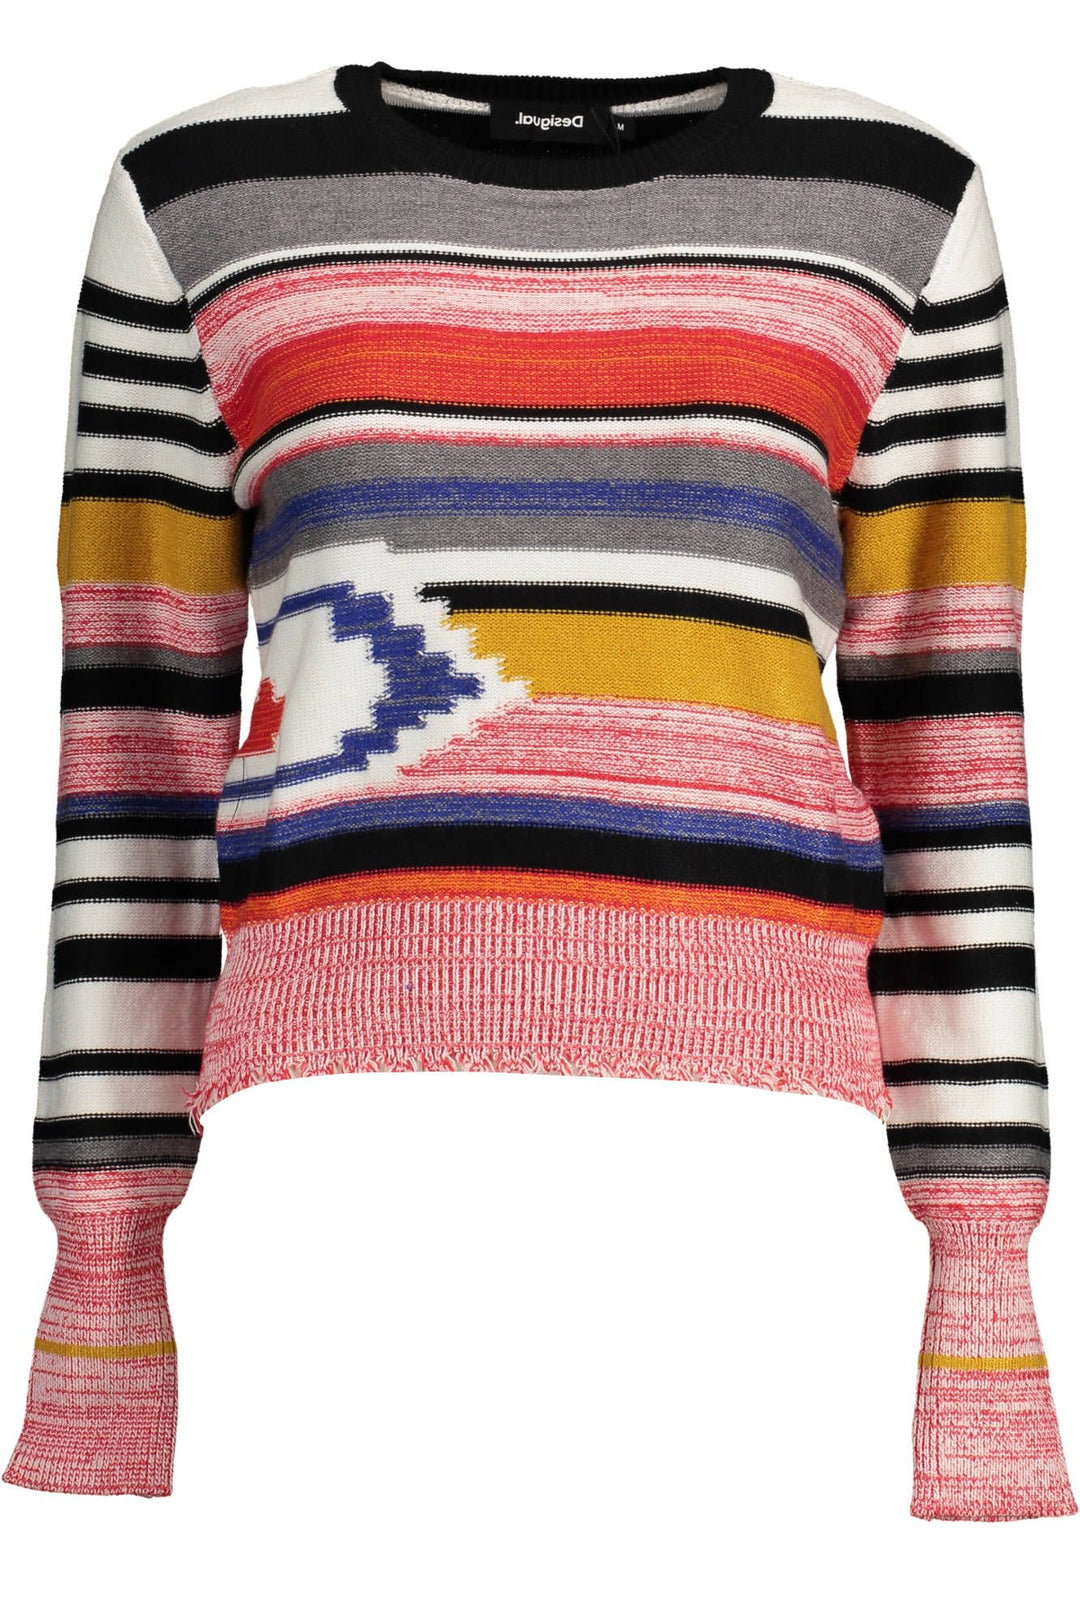 Desigual Chic Pink Round Neck Sweater with Contrasting Detail